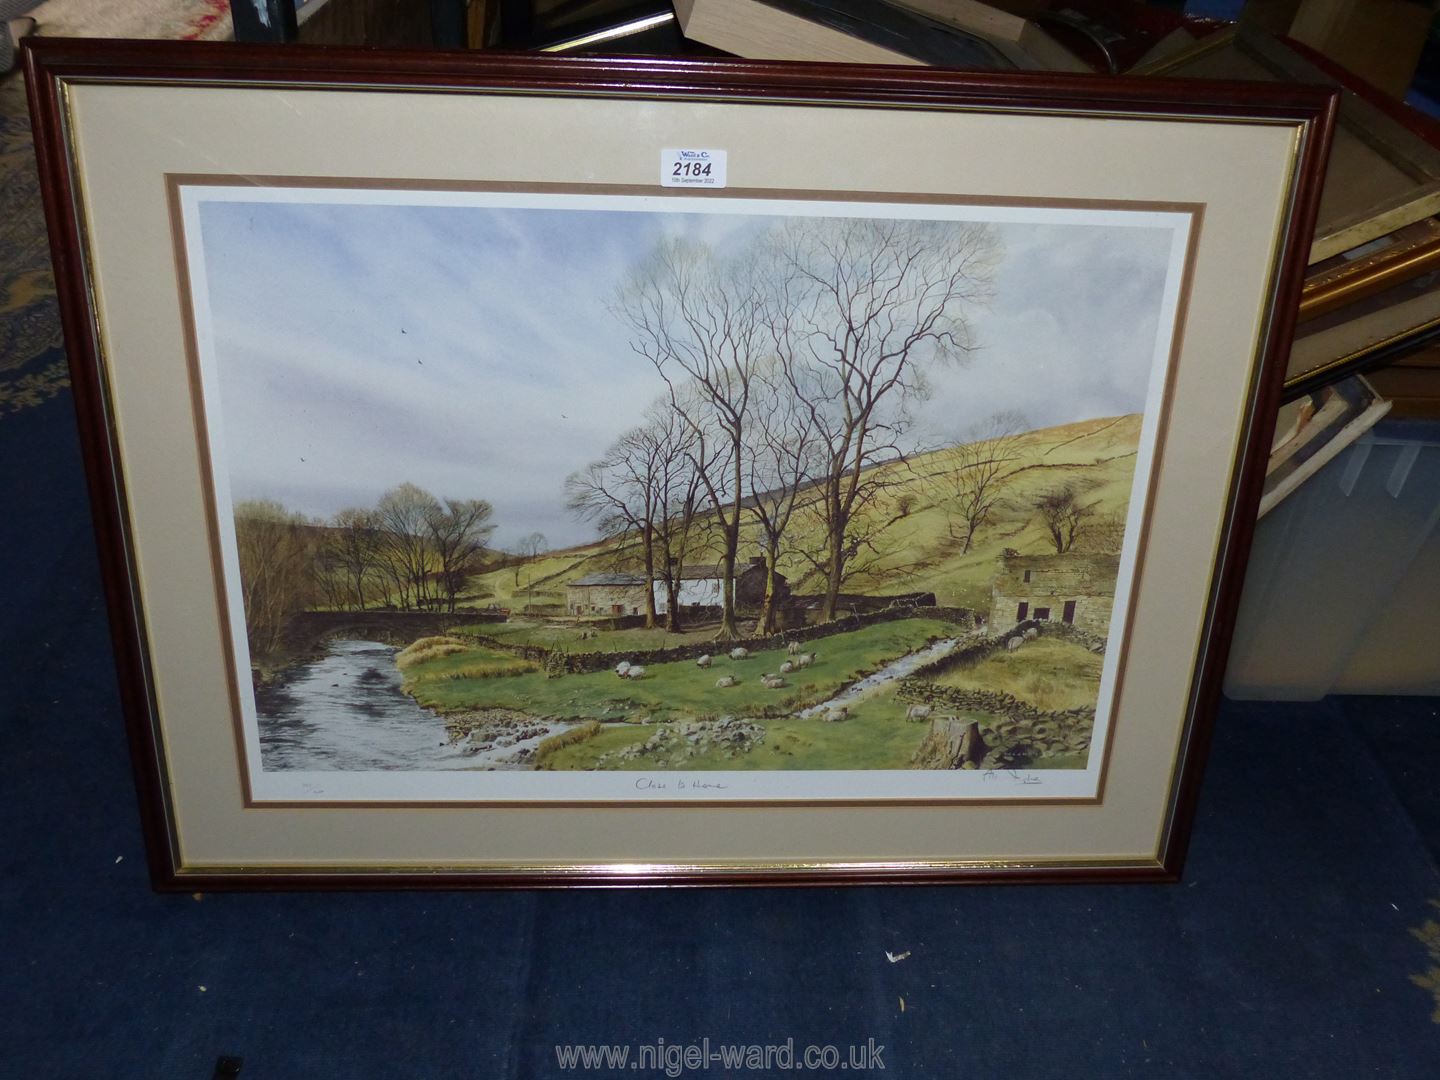 A framed and mounted limited edition (322/600) print by Alan Ingham : 'Close to Home'.